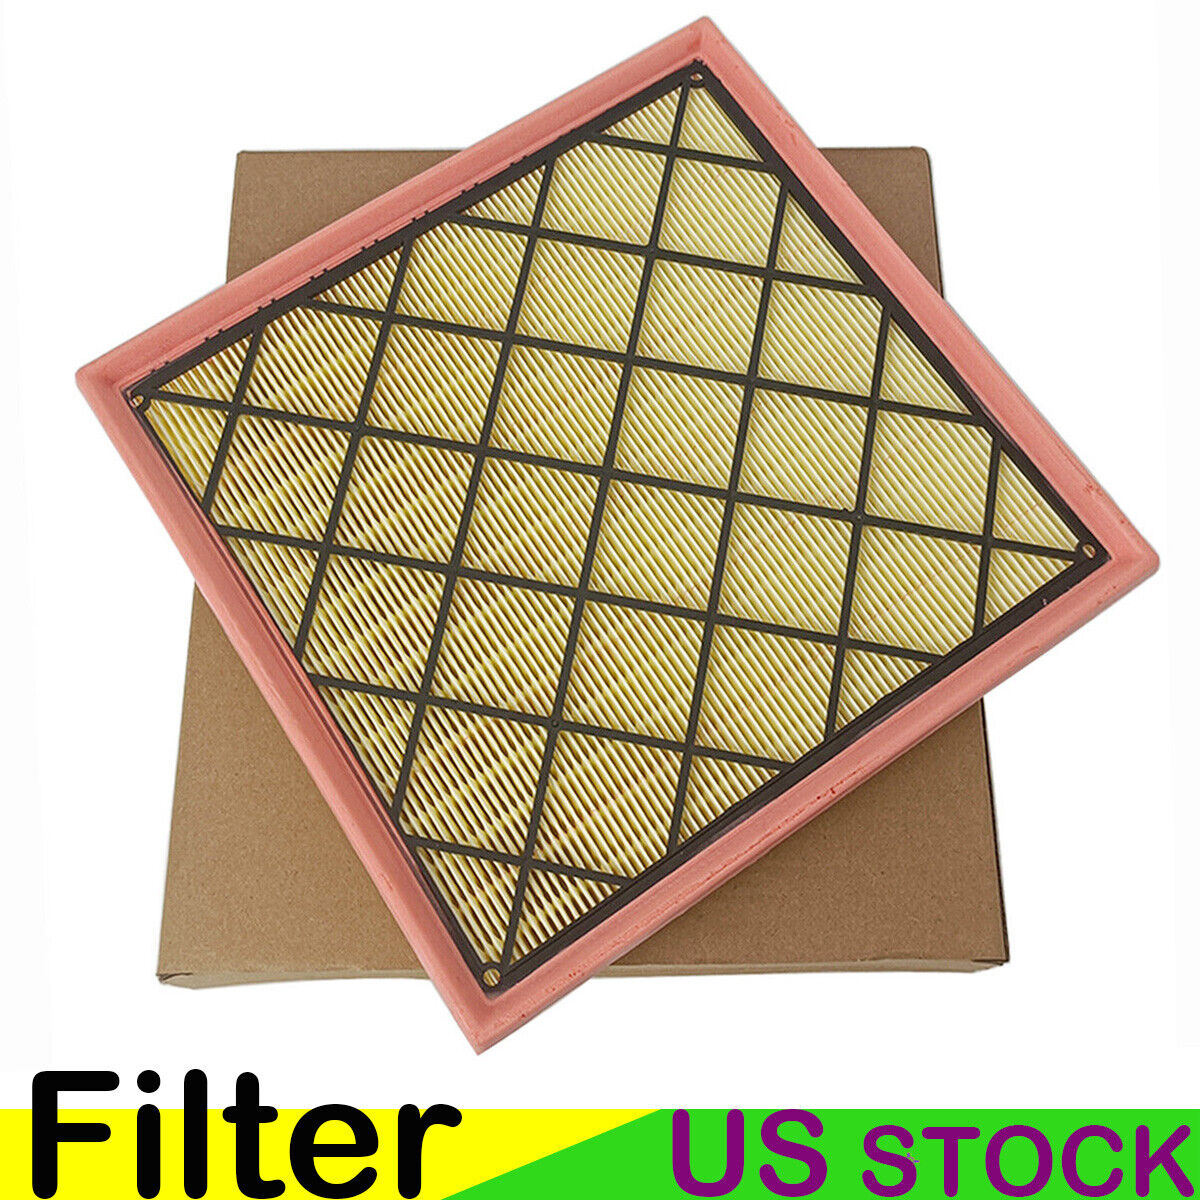 Engine Air Filter For 11-19 Buick Verano Cascada 1.6L For Chevy Cruze 1.4L 11-16